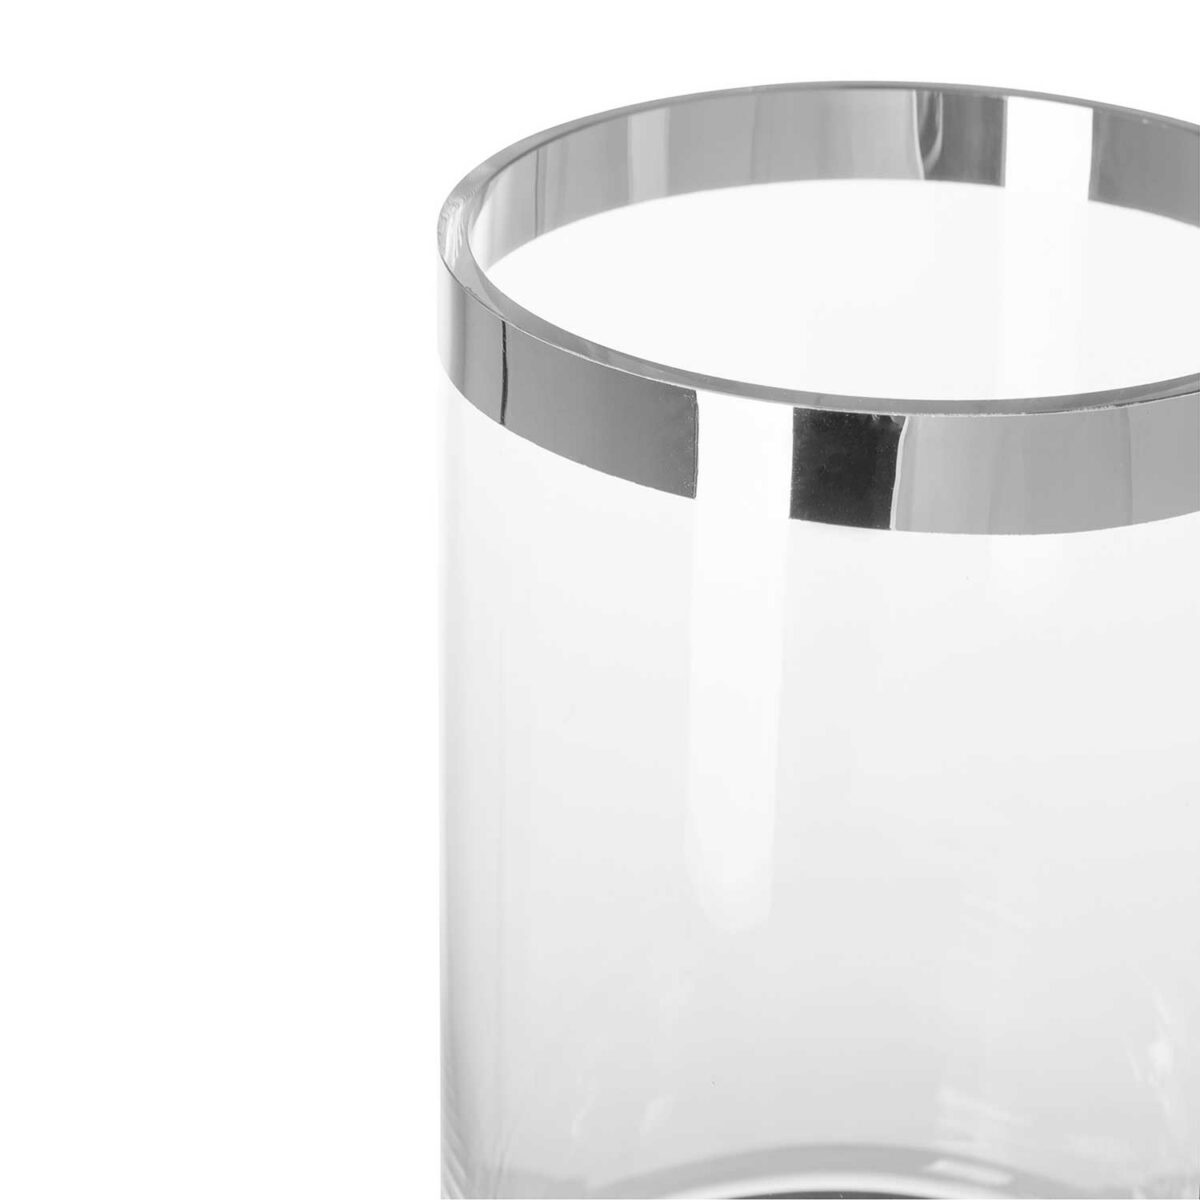 Glass cylinder with silver-colored edge